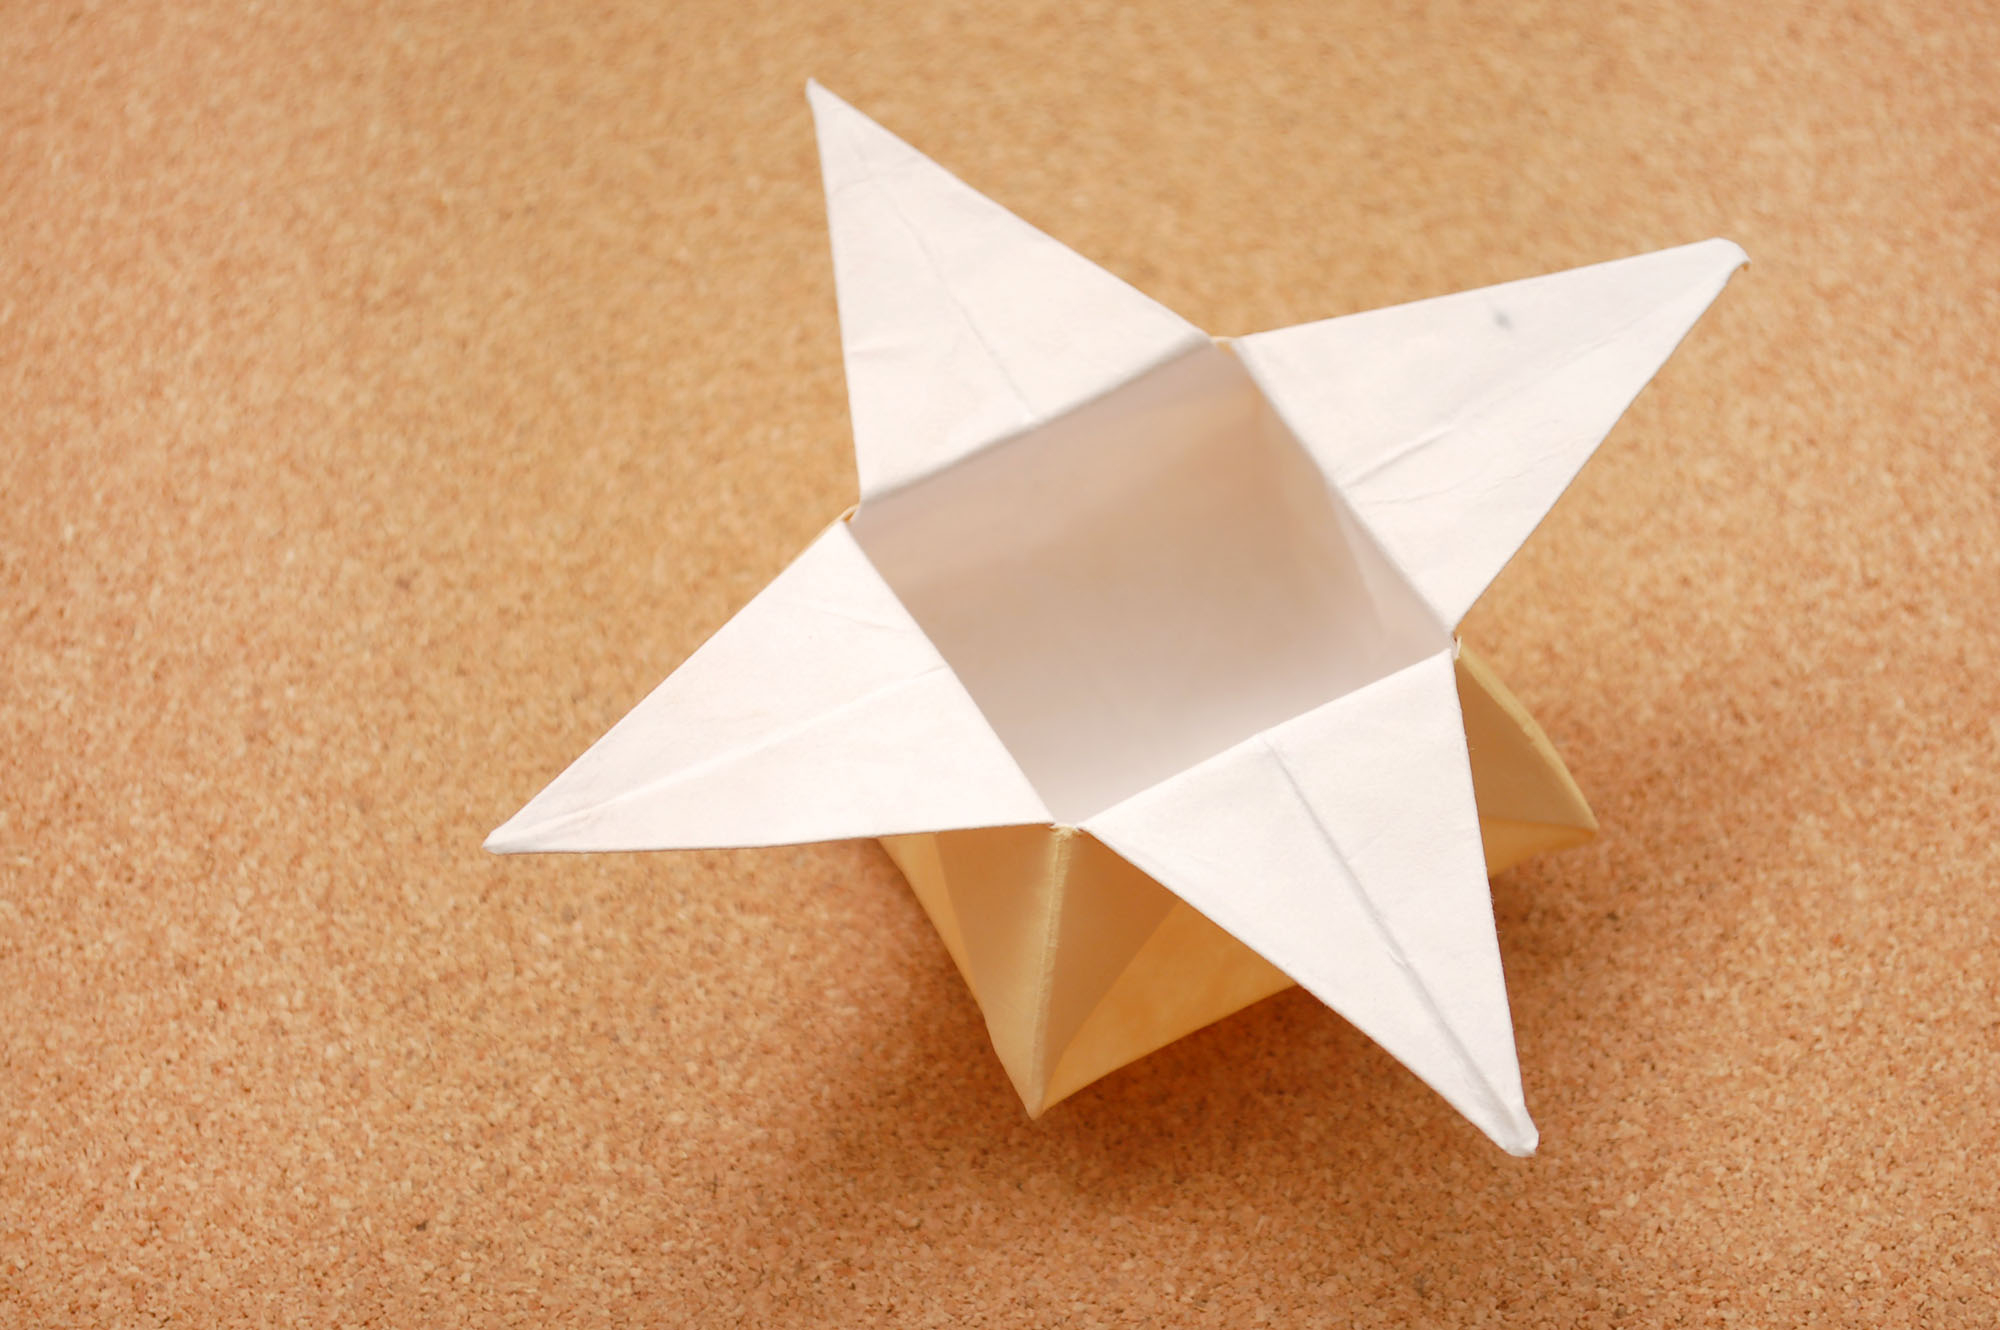 How To Do A Origami Box How To Make An Origami Star Box With Pictures Wikihow